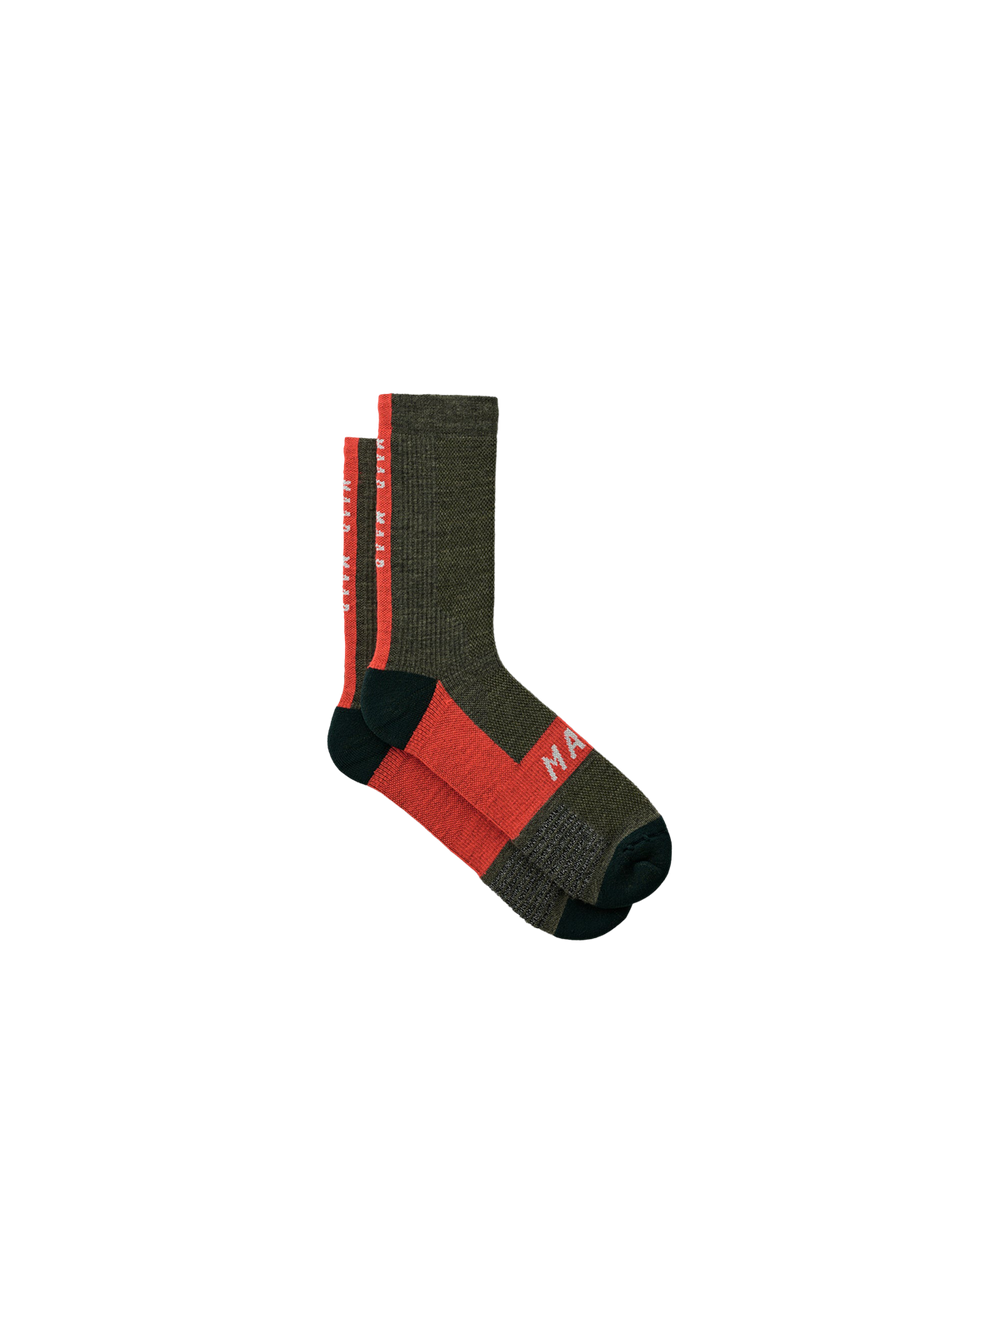 Product Image for Alt_Road Trail Sock